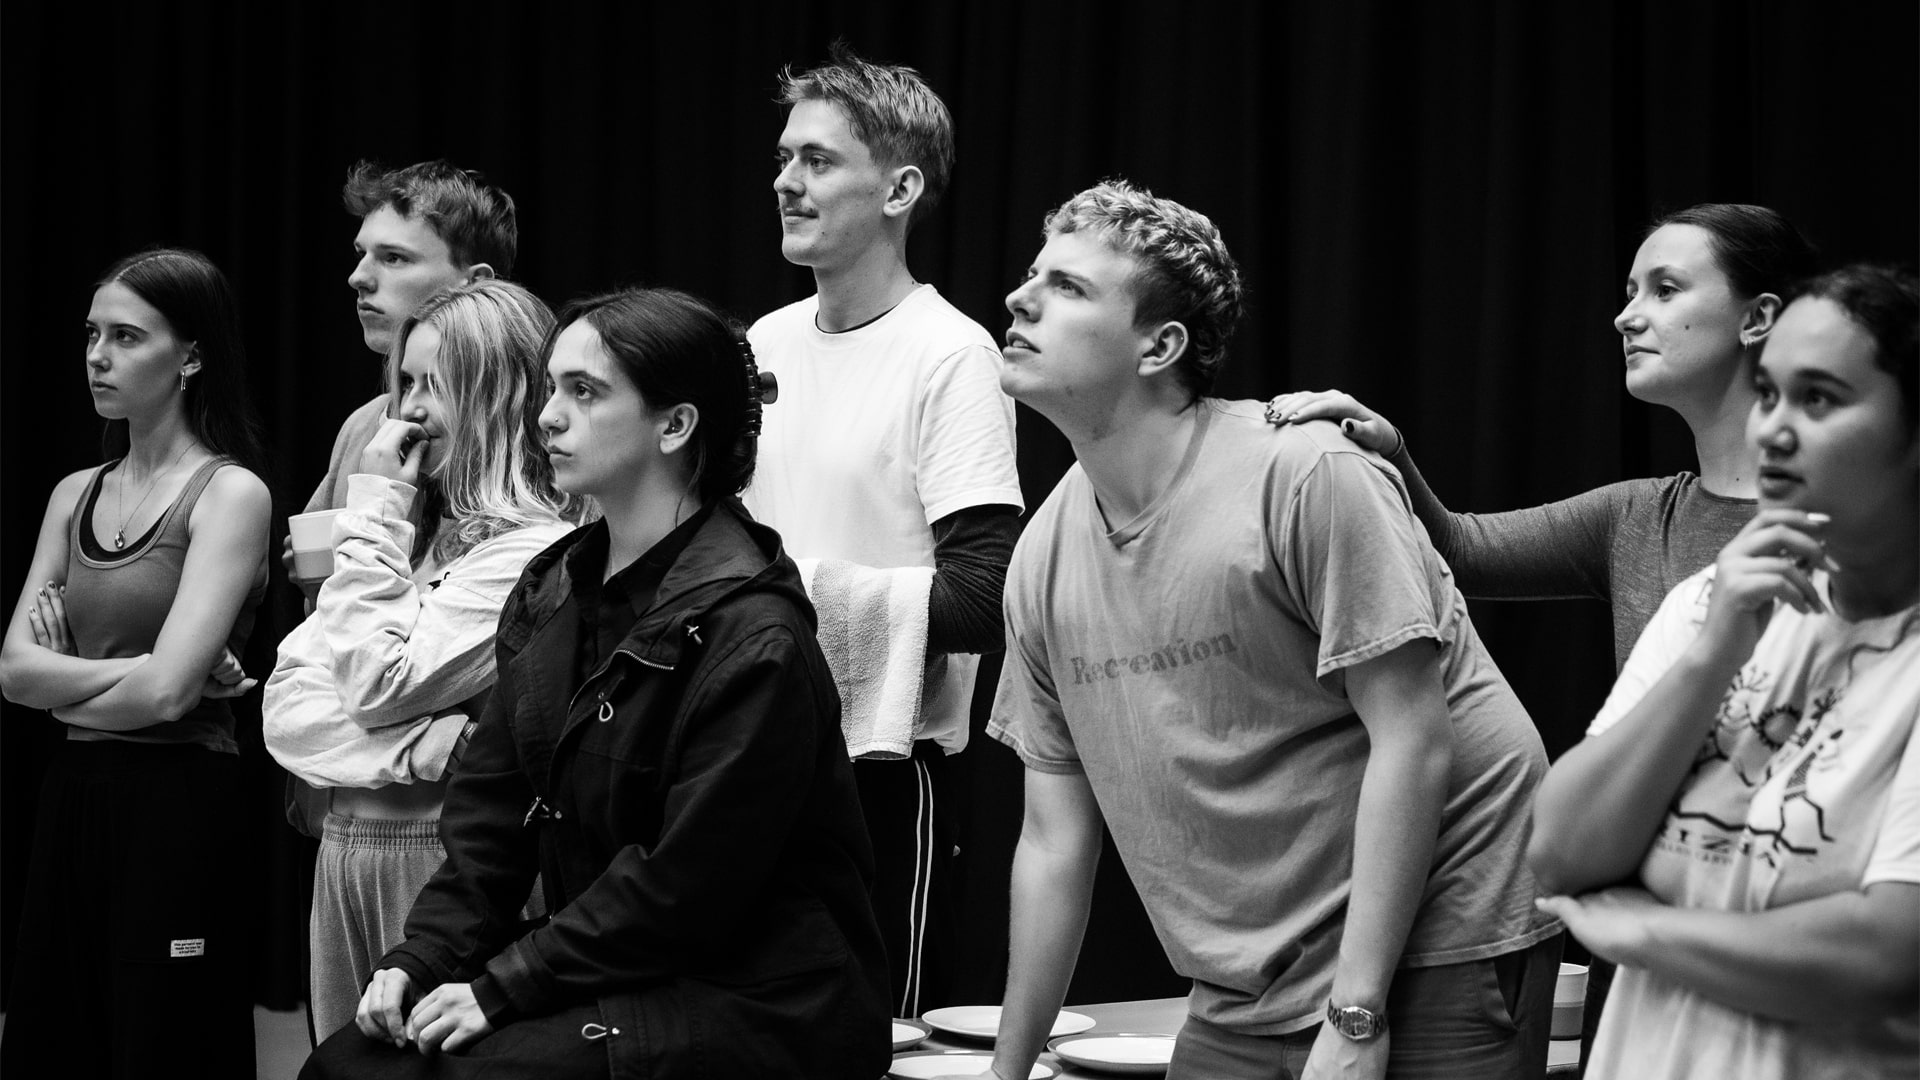 Alice rehearsal photo: monochrome; eight casually-dressed young people gather around a table laid with china plates, their attention focused on a point off-camera to the left.